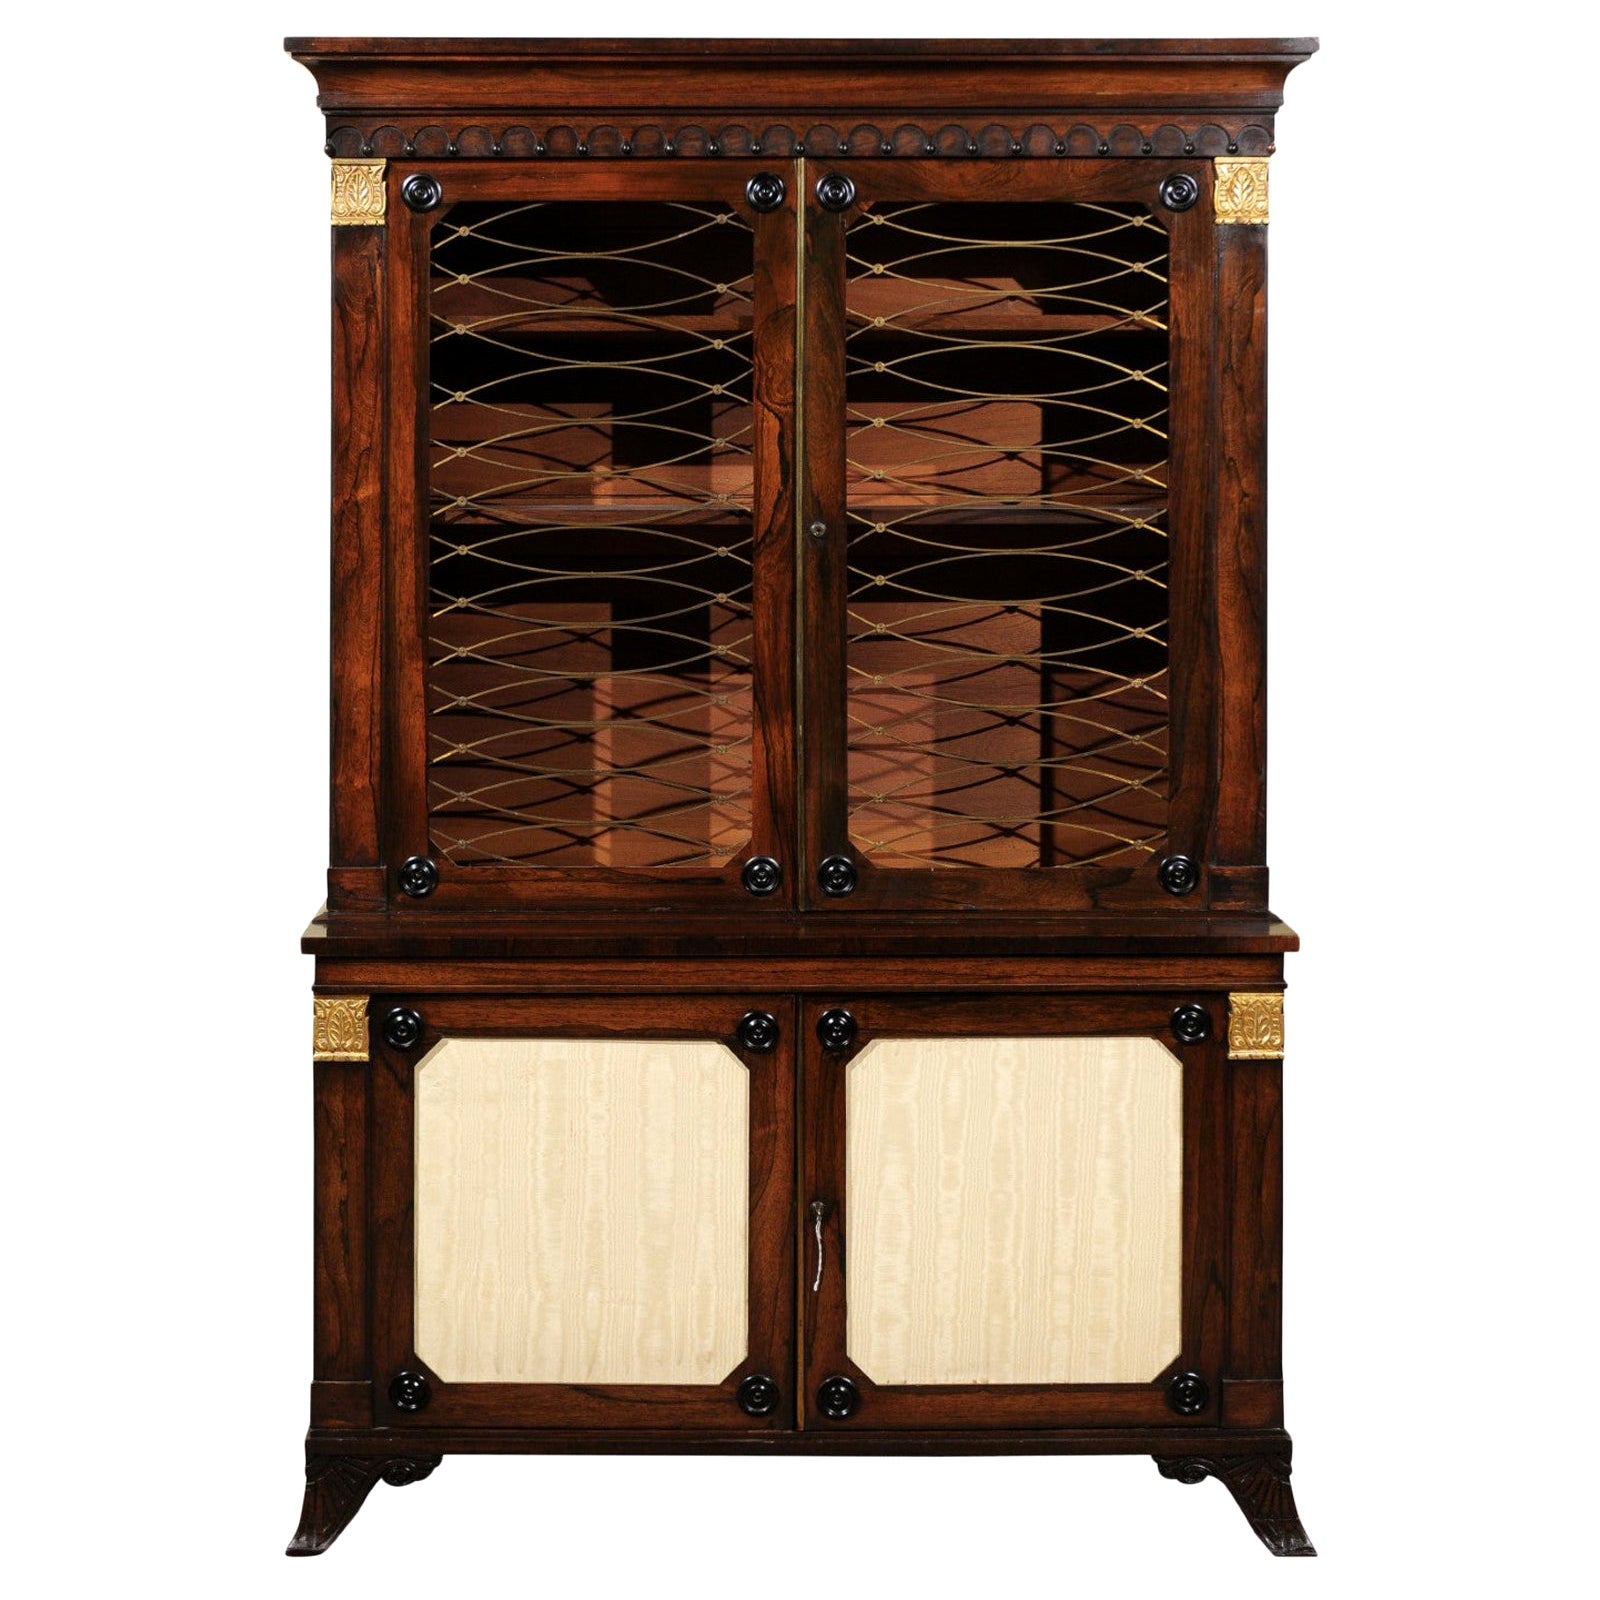 19th Century English Regency Style Rosewood Bookcase/Cabinet with Gilt Accents